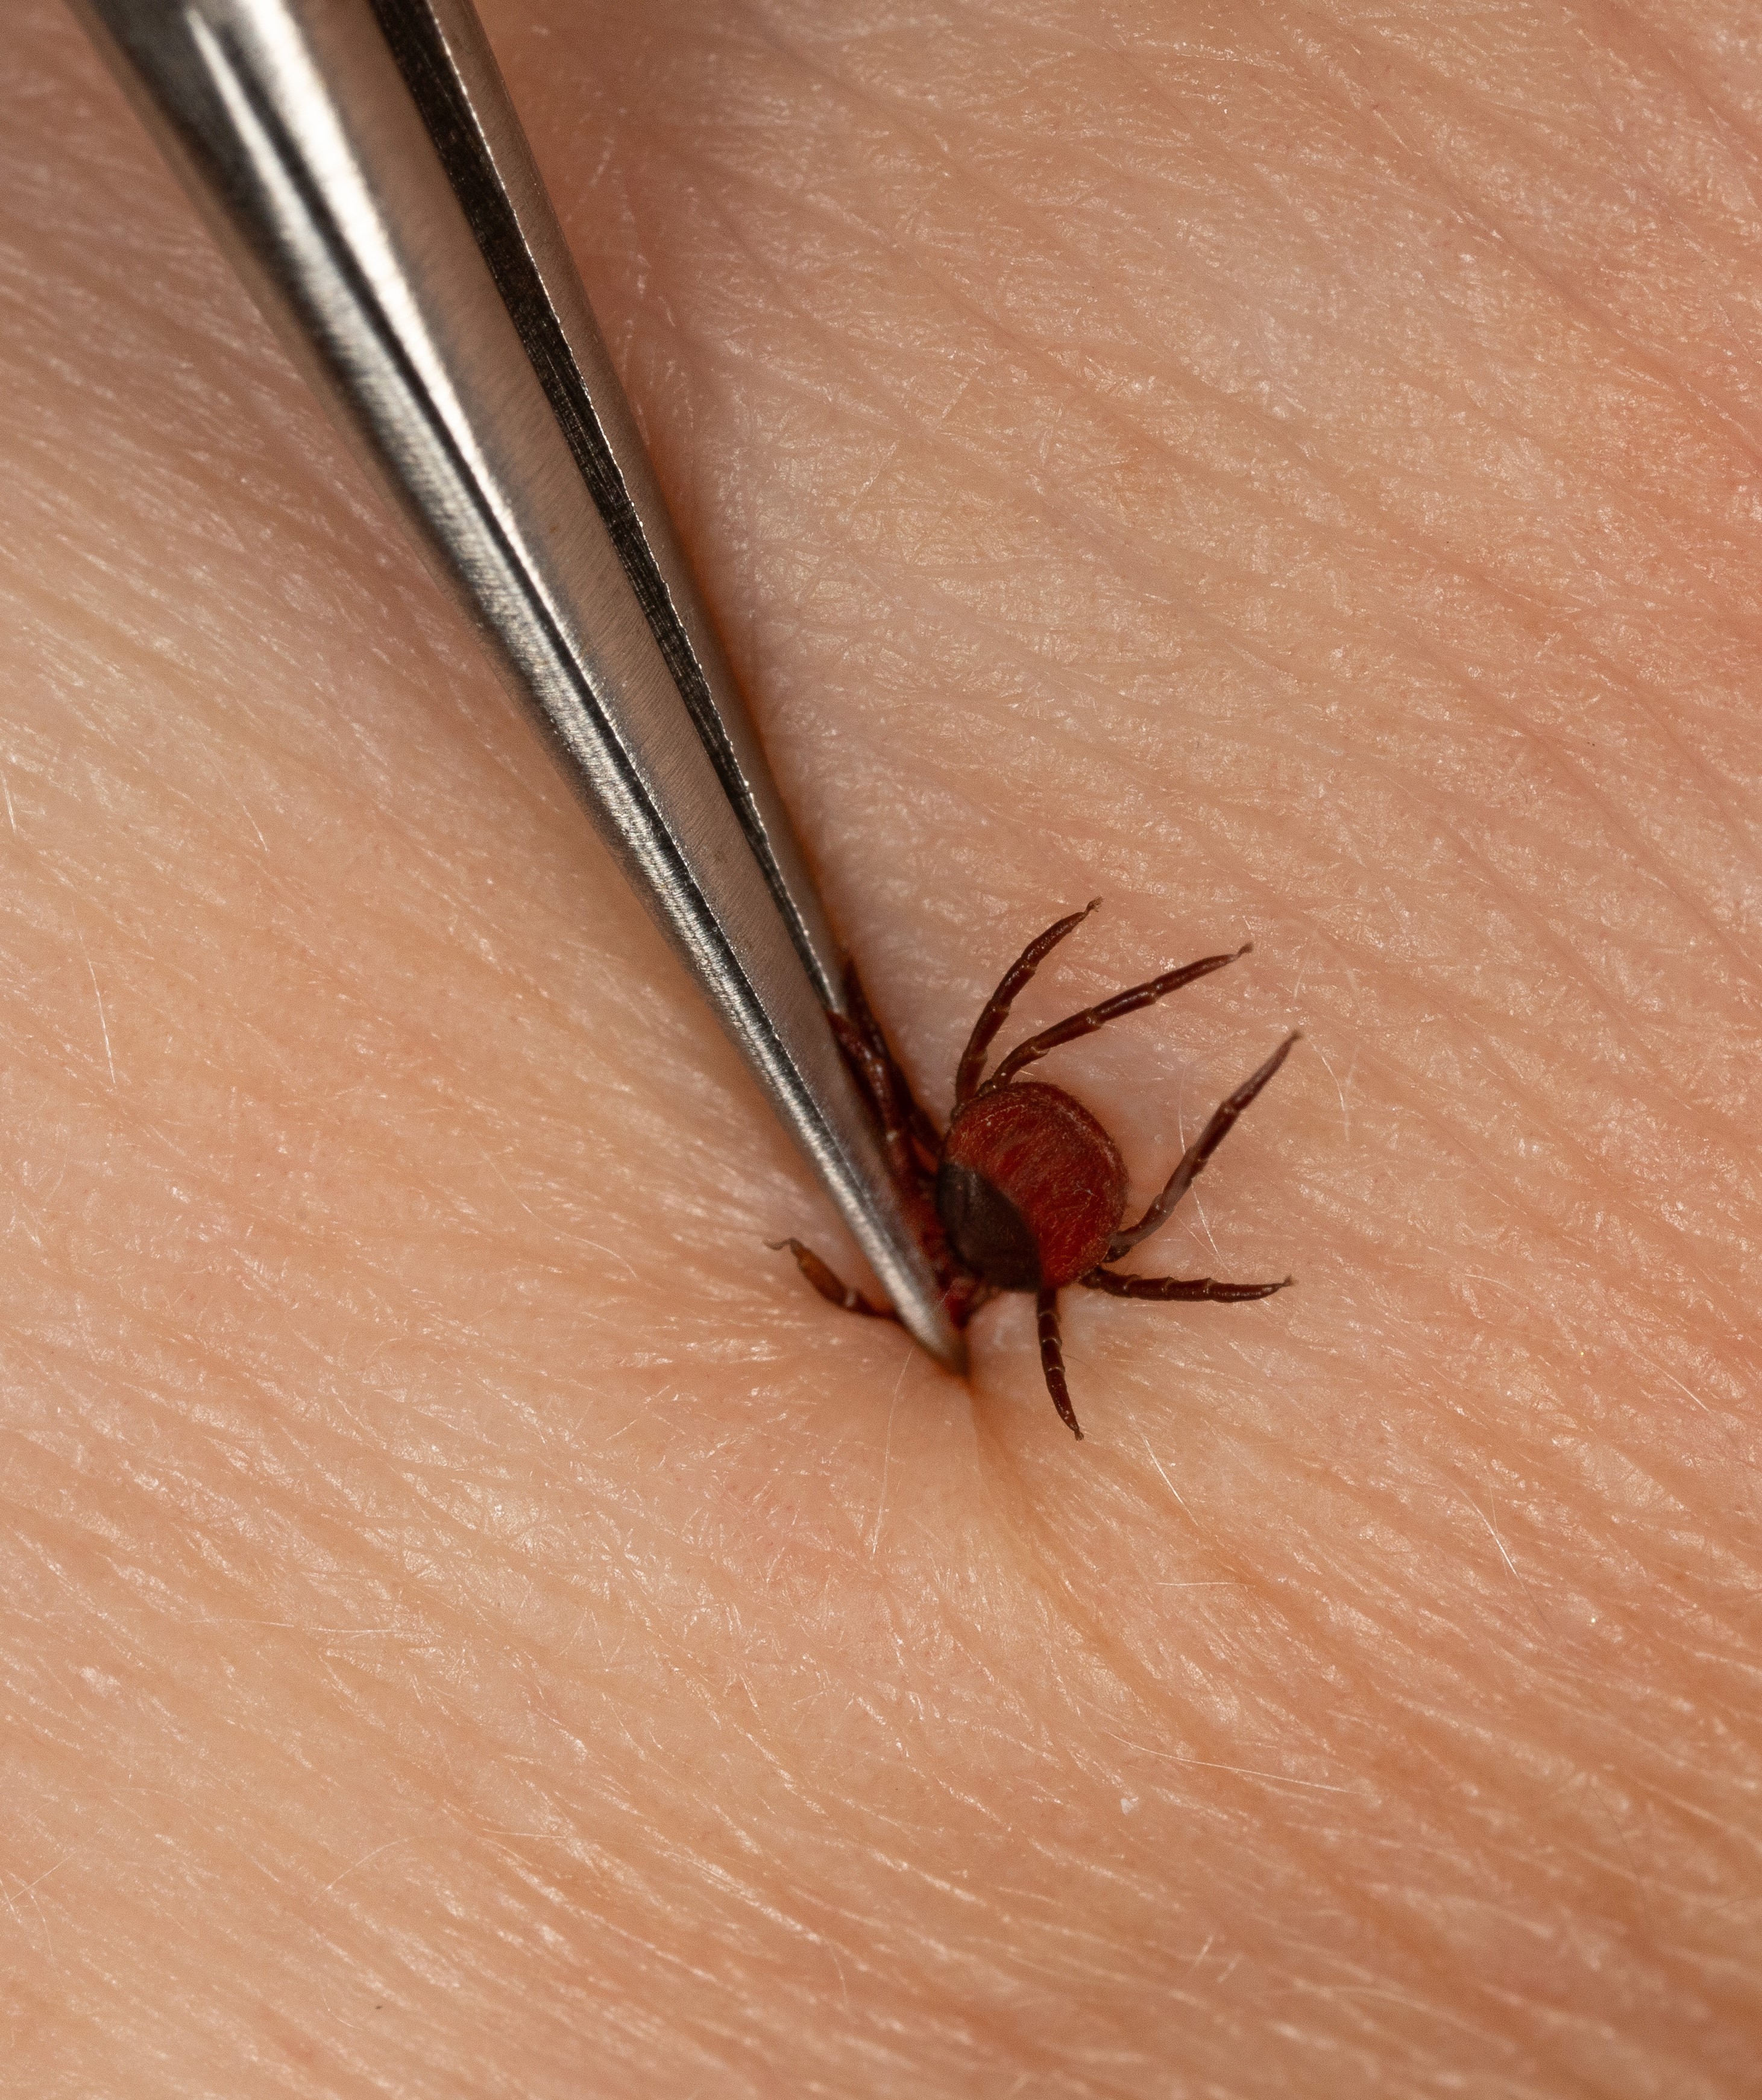 Removing embedded tick from the skin with forceps